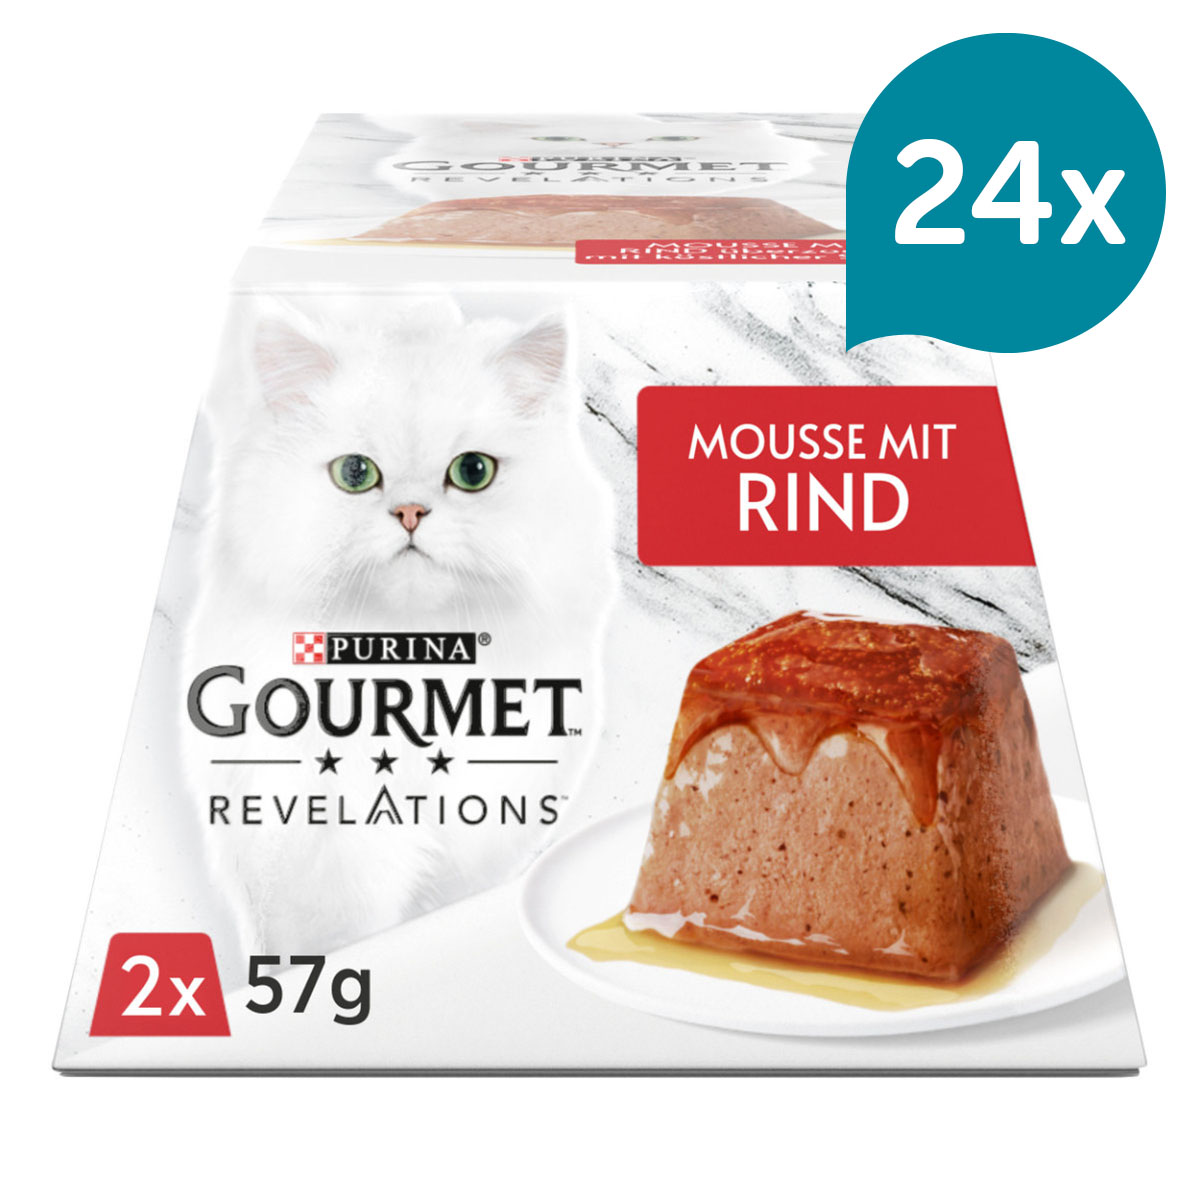 GOURMET Revelations Mousse in Sauce mit Rind 24x2x57g